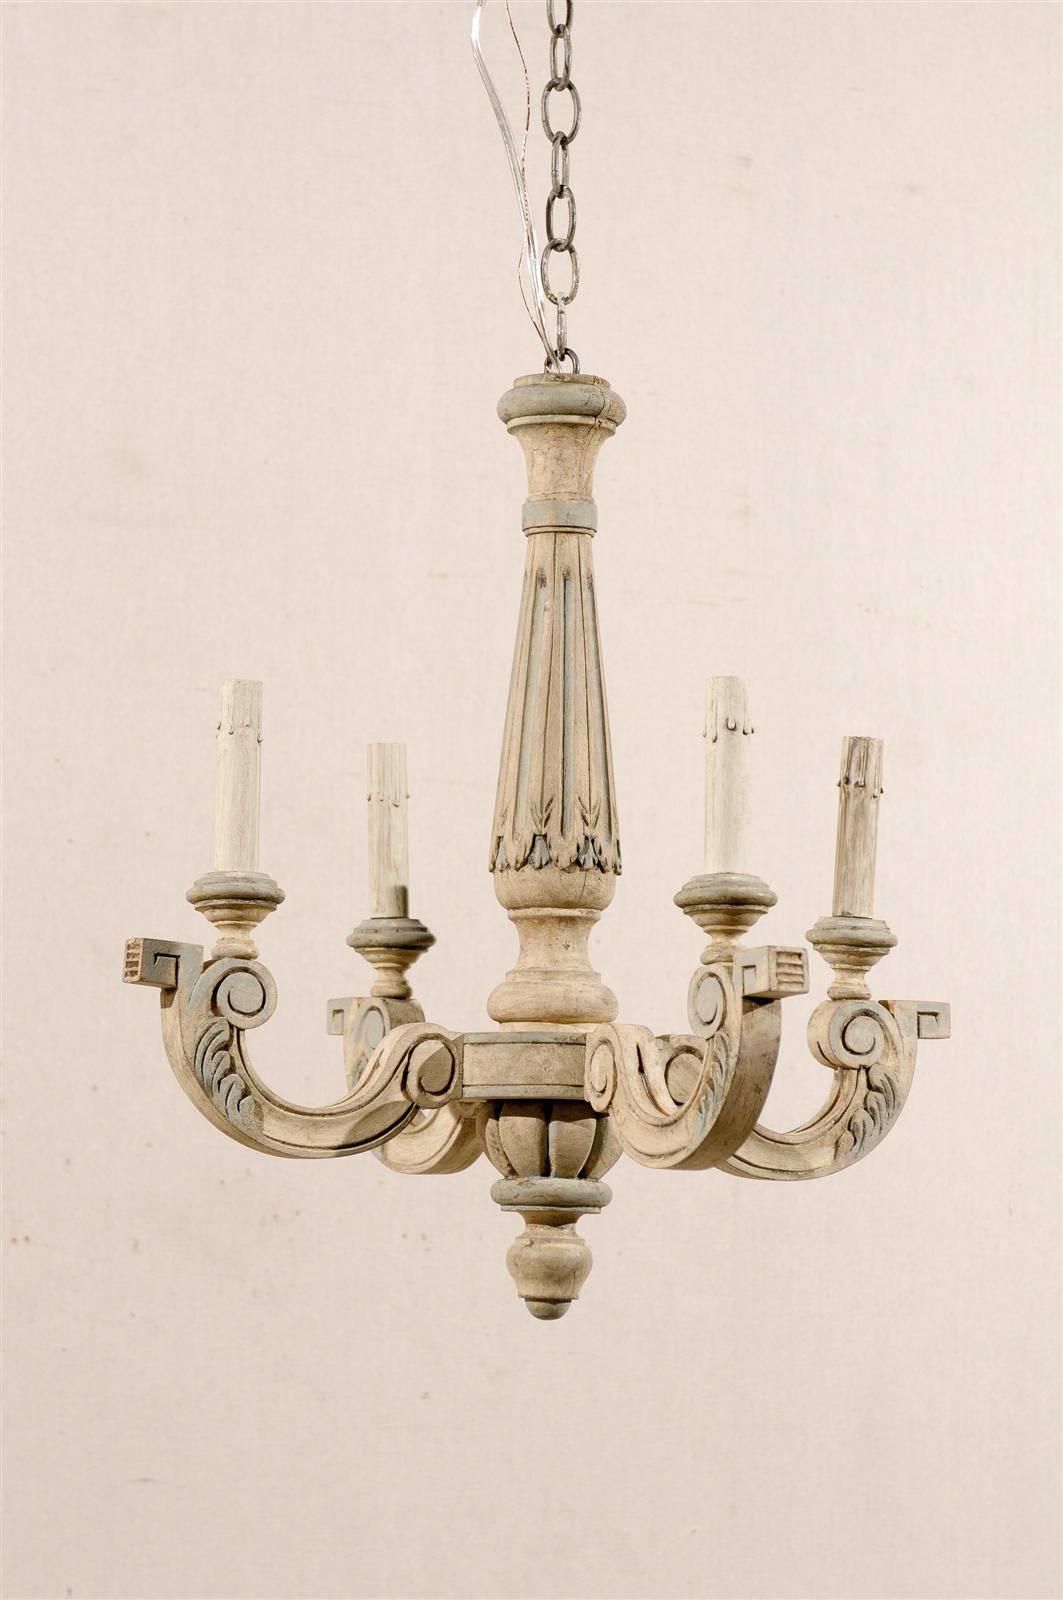 A French four-light painted and carved wood chandelier with thin central column and C-scrolled arms ornate with discreet leaf motif and terminated by a geometrical volute. From the mid-20th century, this French chandelier has been rewired for the US